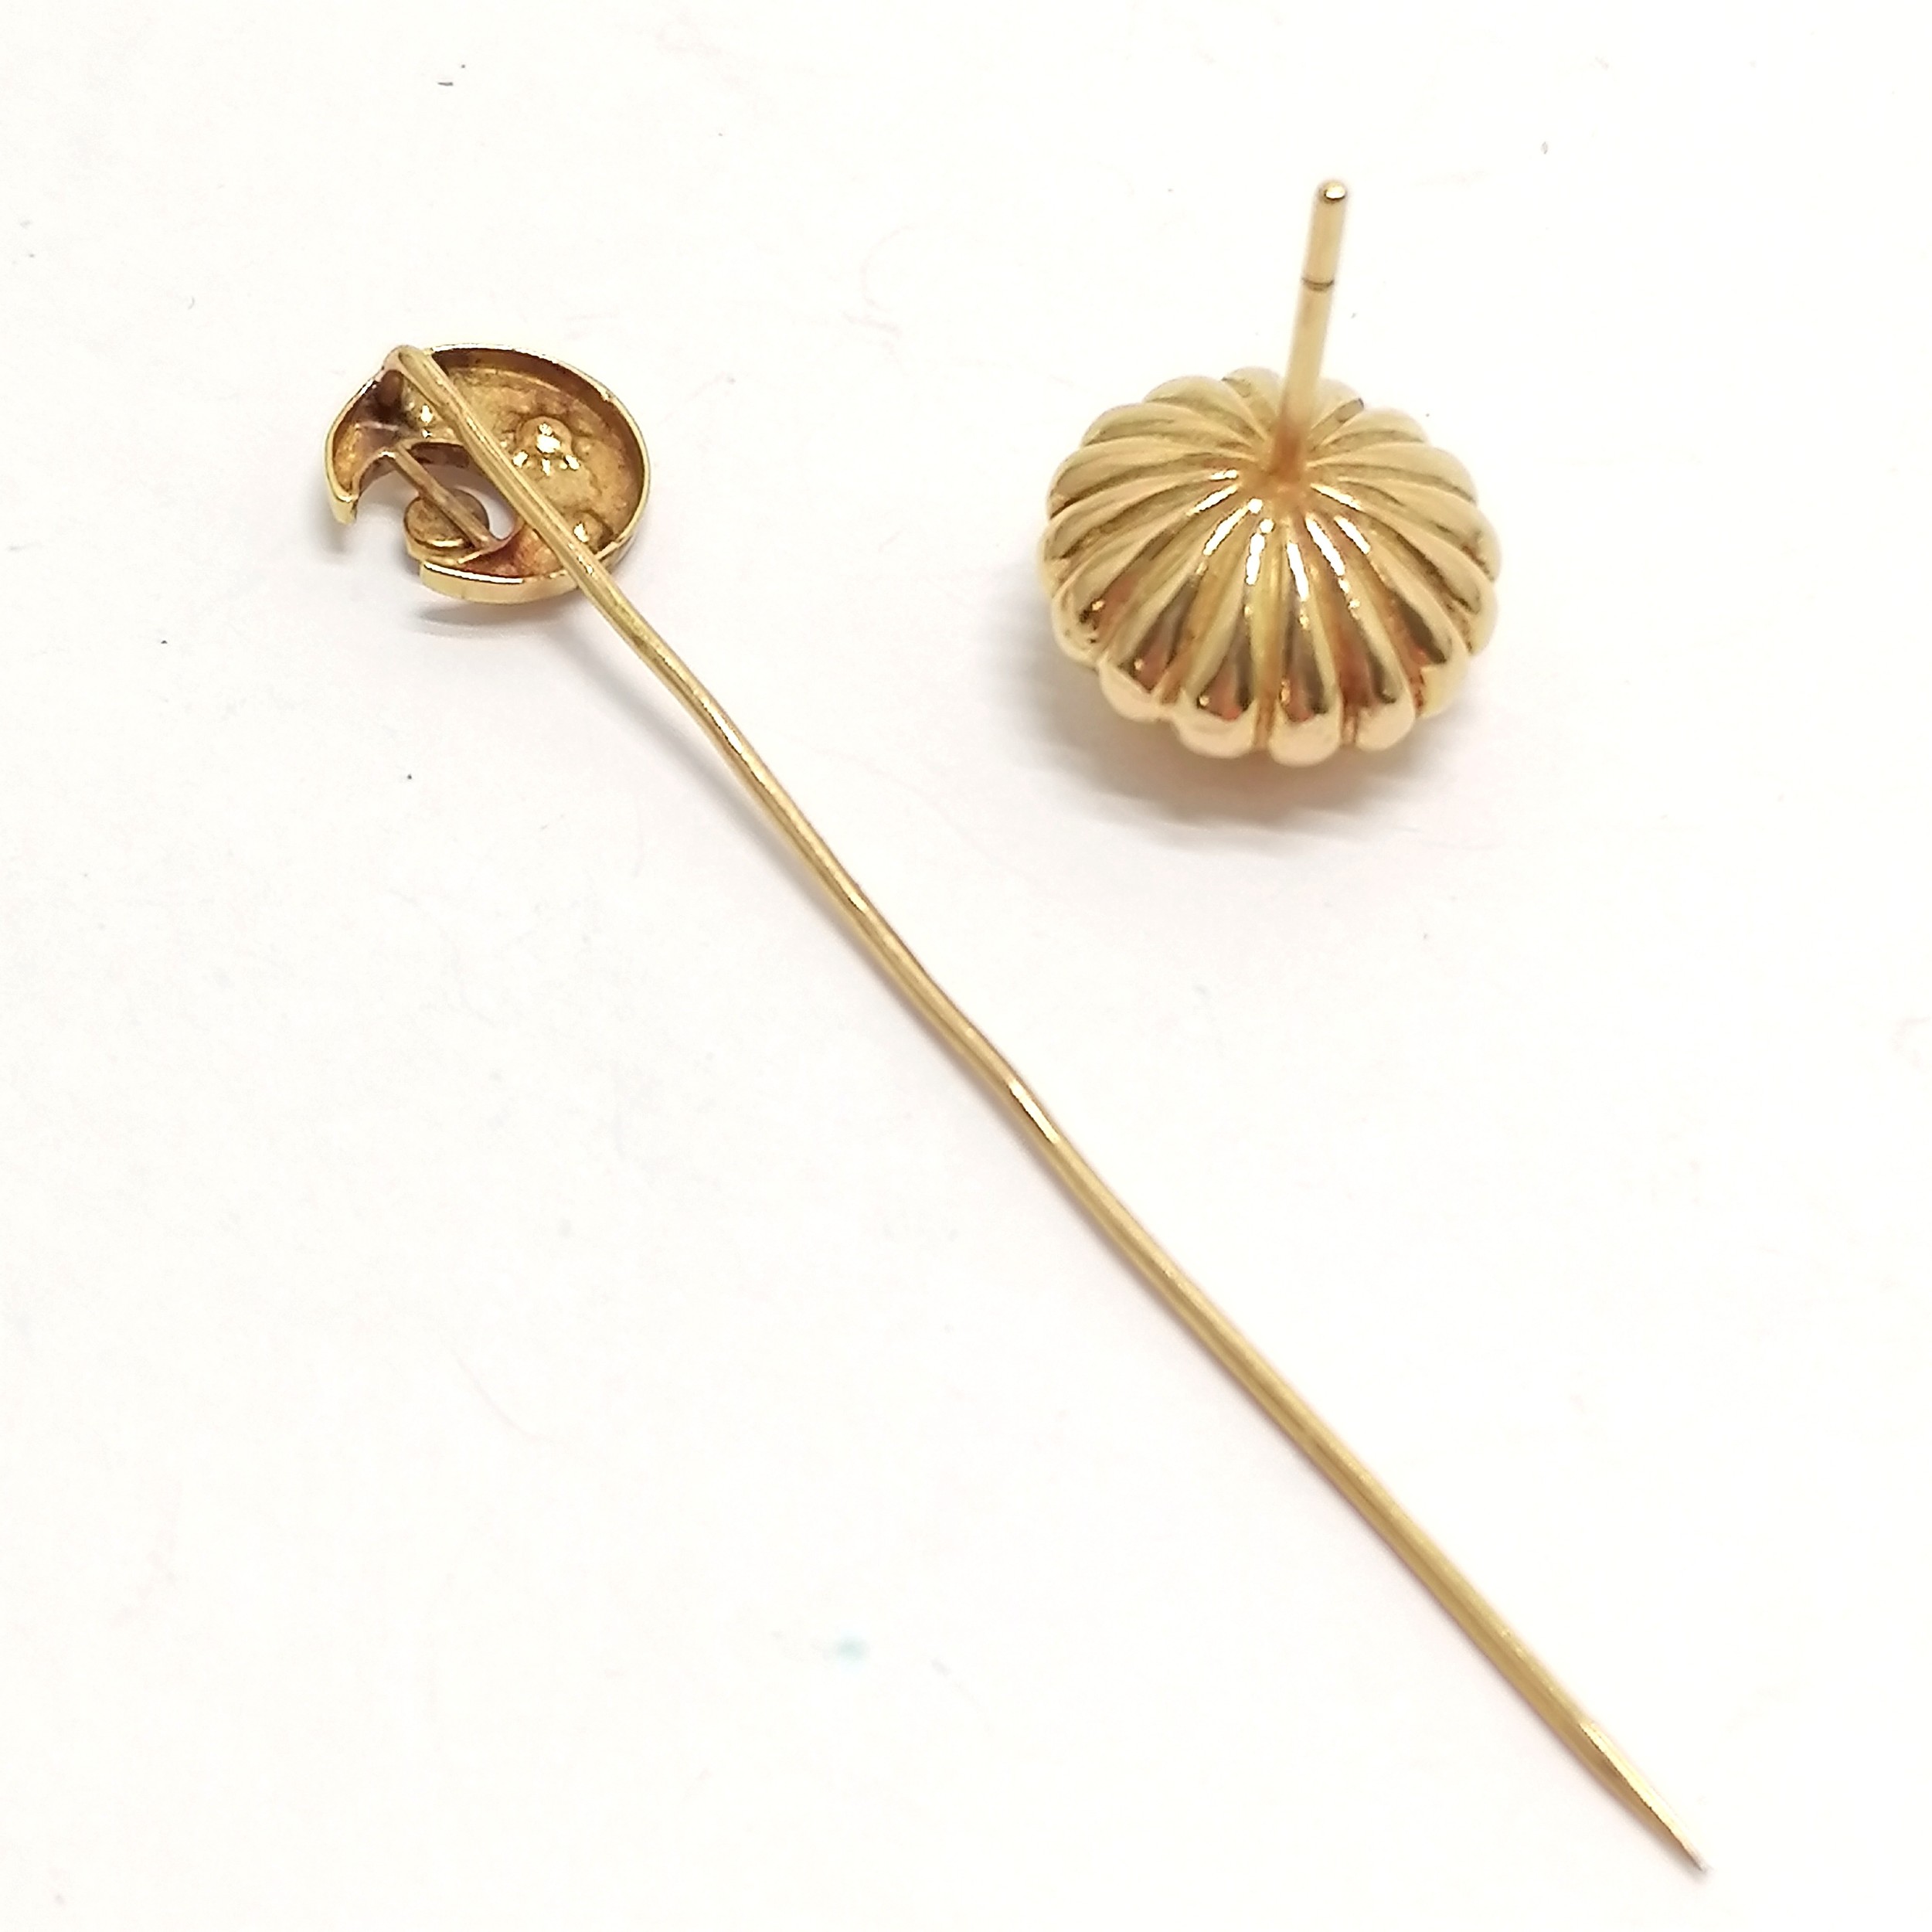 Antique unmarked 18ct gold tie pin in the form of a crescent moon set with pearls - 6cm t/w unmarked - Image 2 of 2